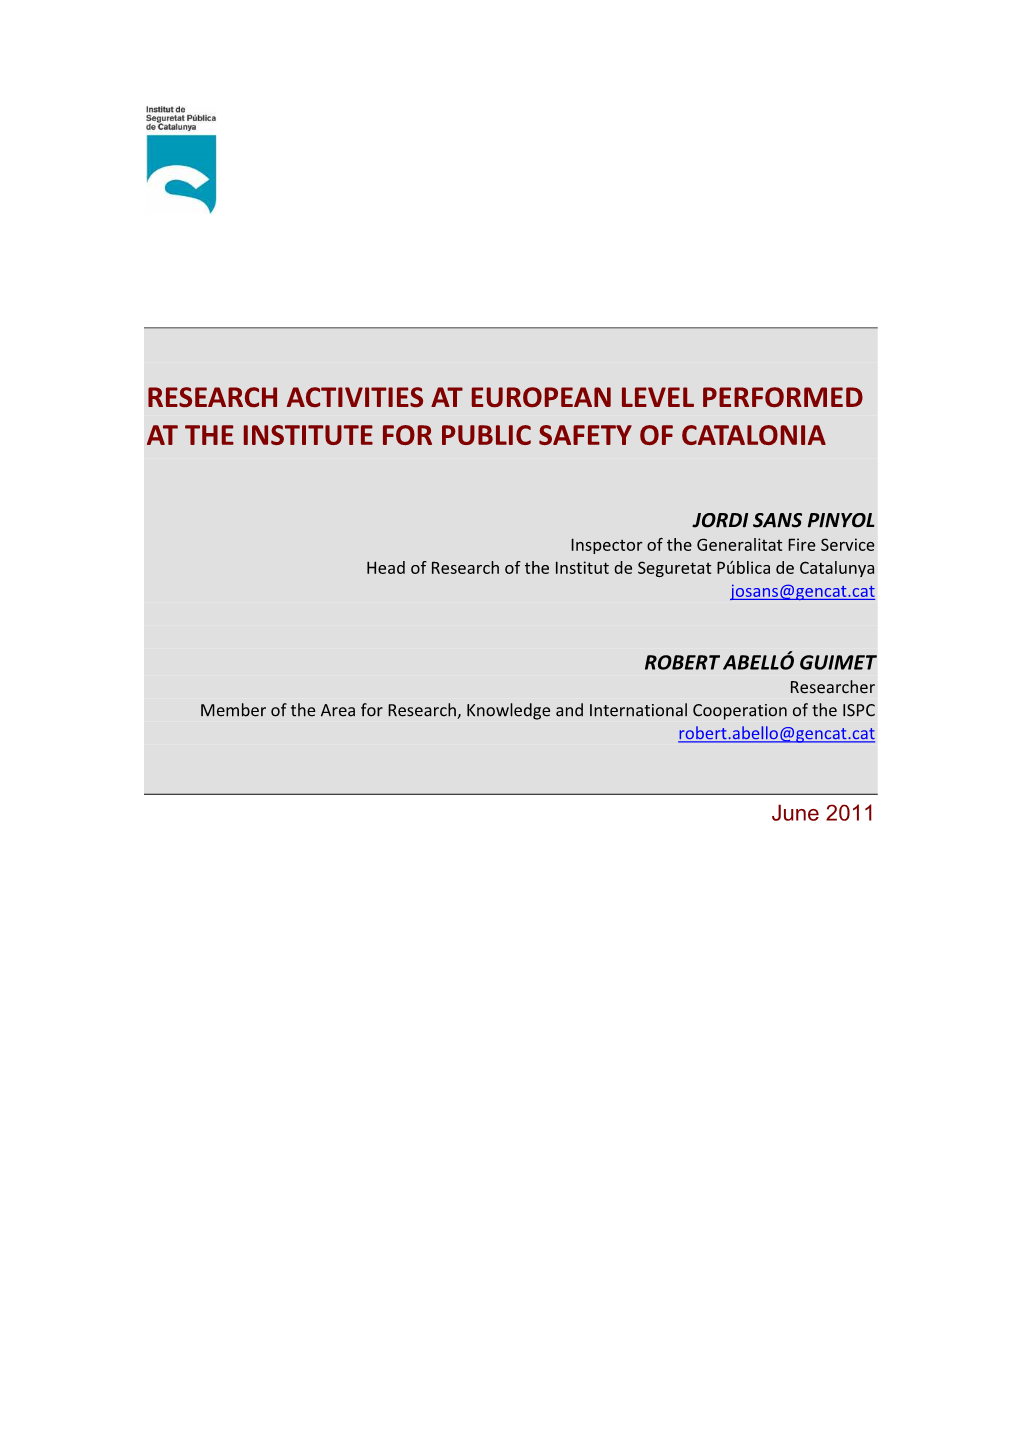 Research Activities at European Level Performed at the Institute for Public Safety of Catalonia